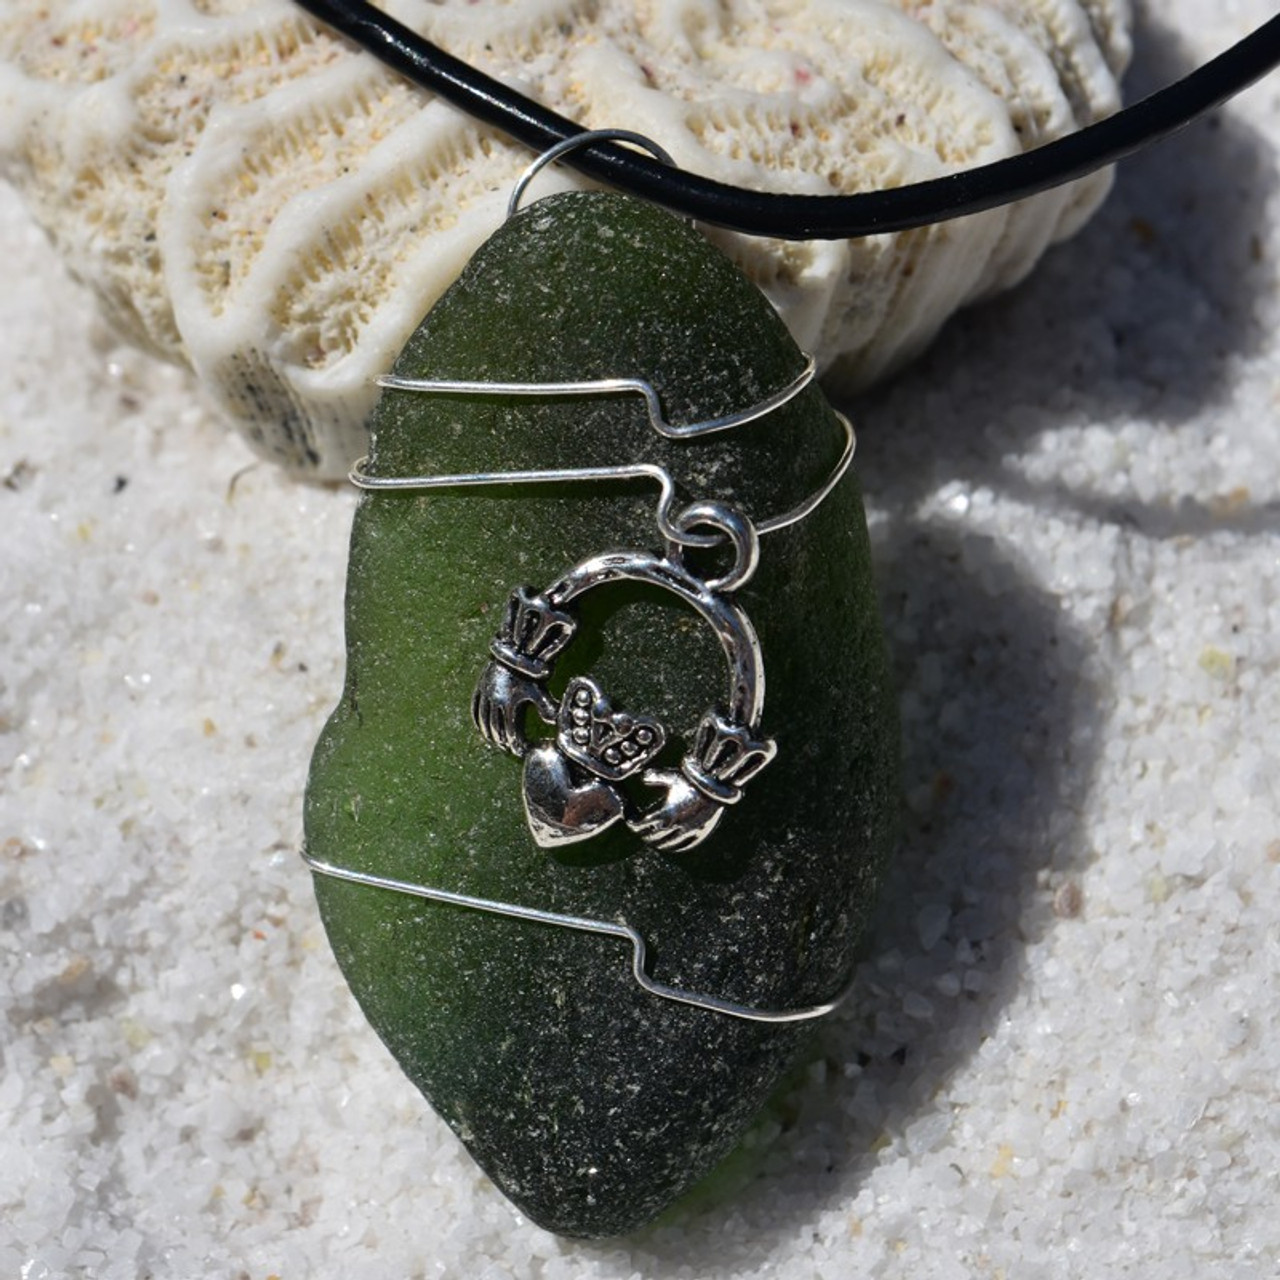 Custom Handmade Genuine Sea Glass Necklace with a Silver Claddagh Charm - Choose the Color - Frosted, Green, Brown, or Aqua